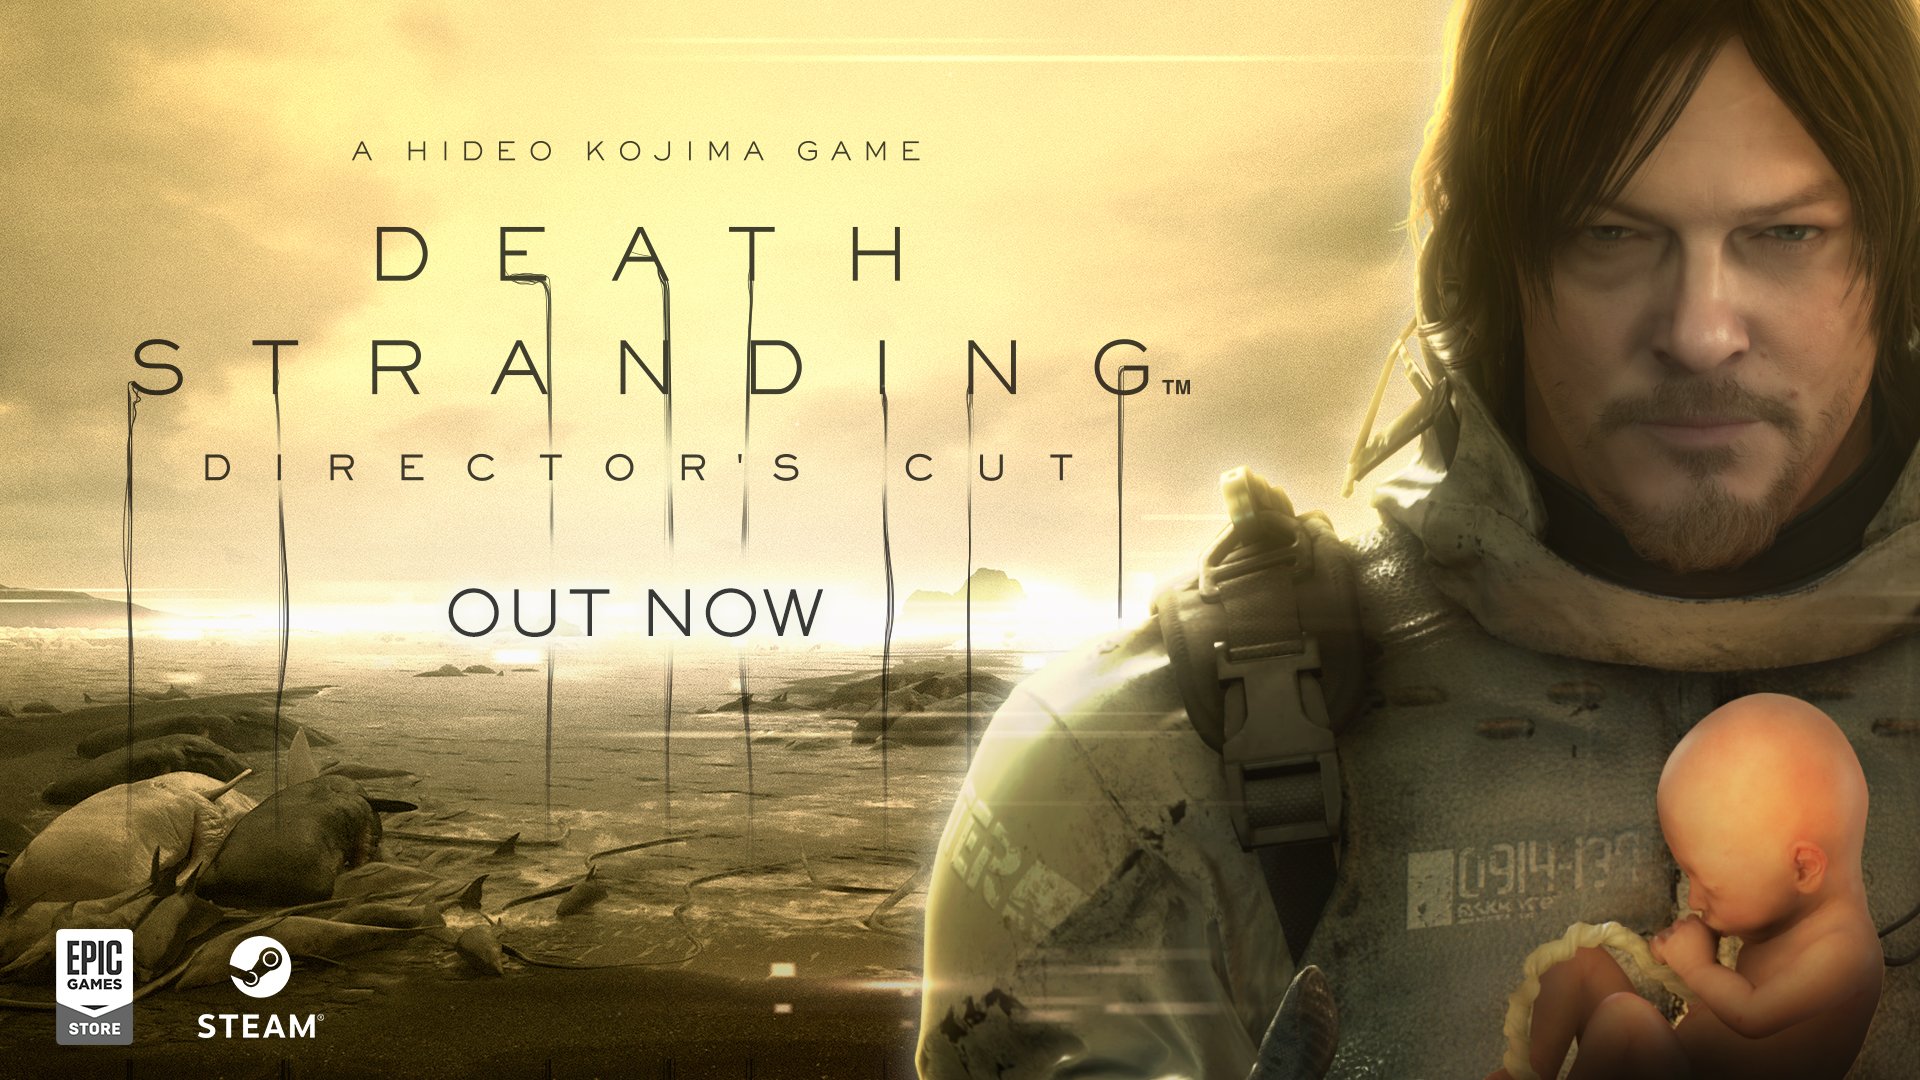 『DEATH STRANDING DIRECTOR’S CUT』OUT NOW!